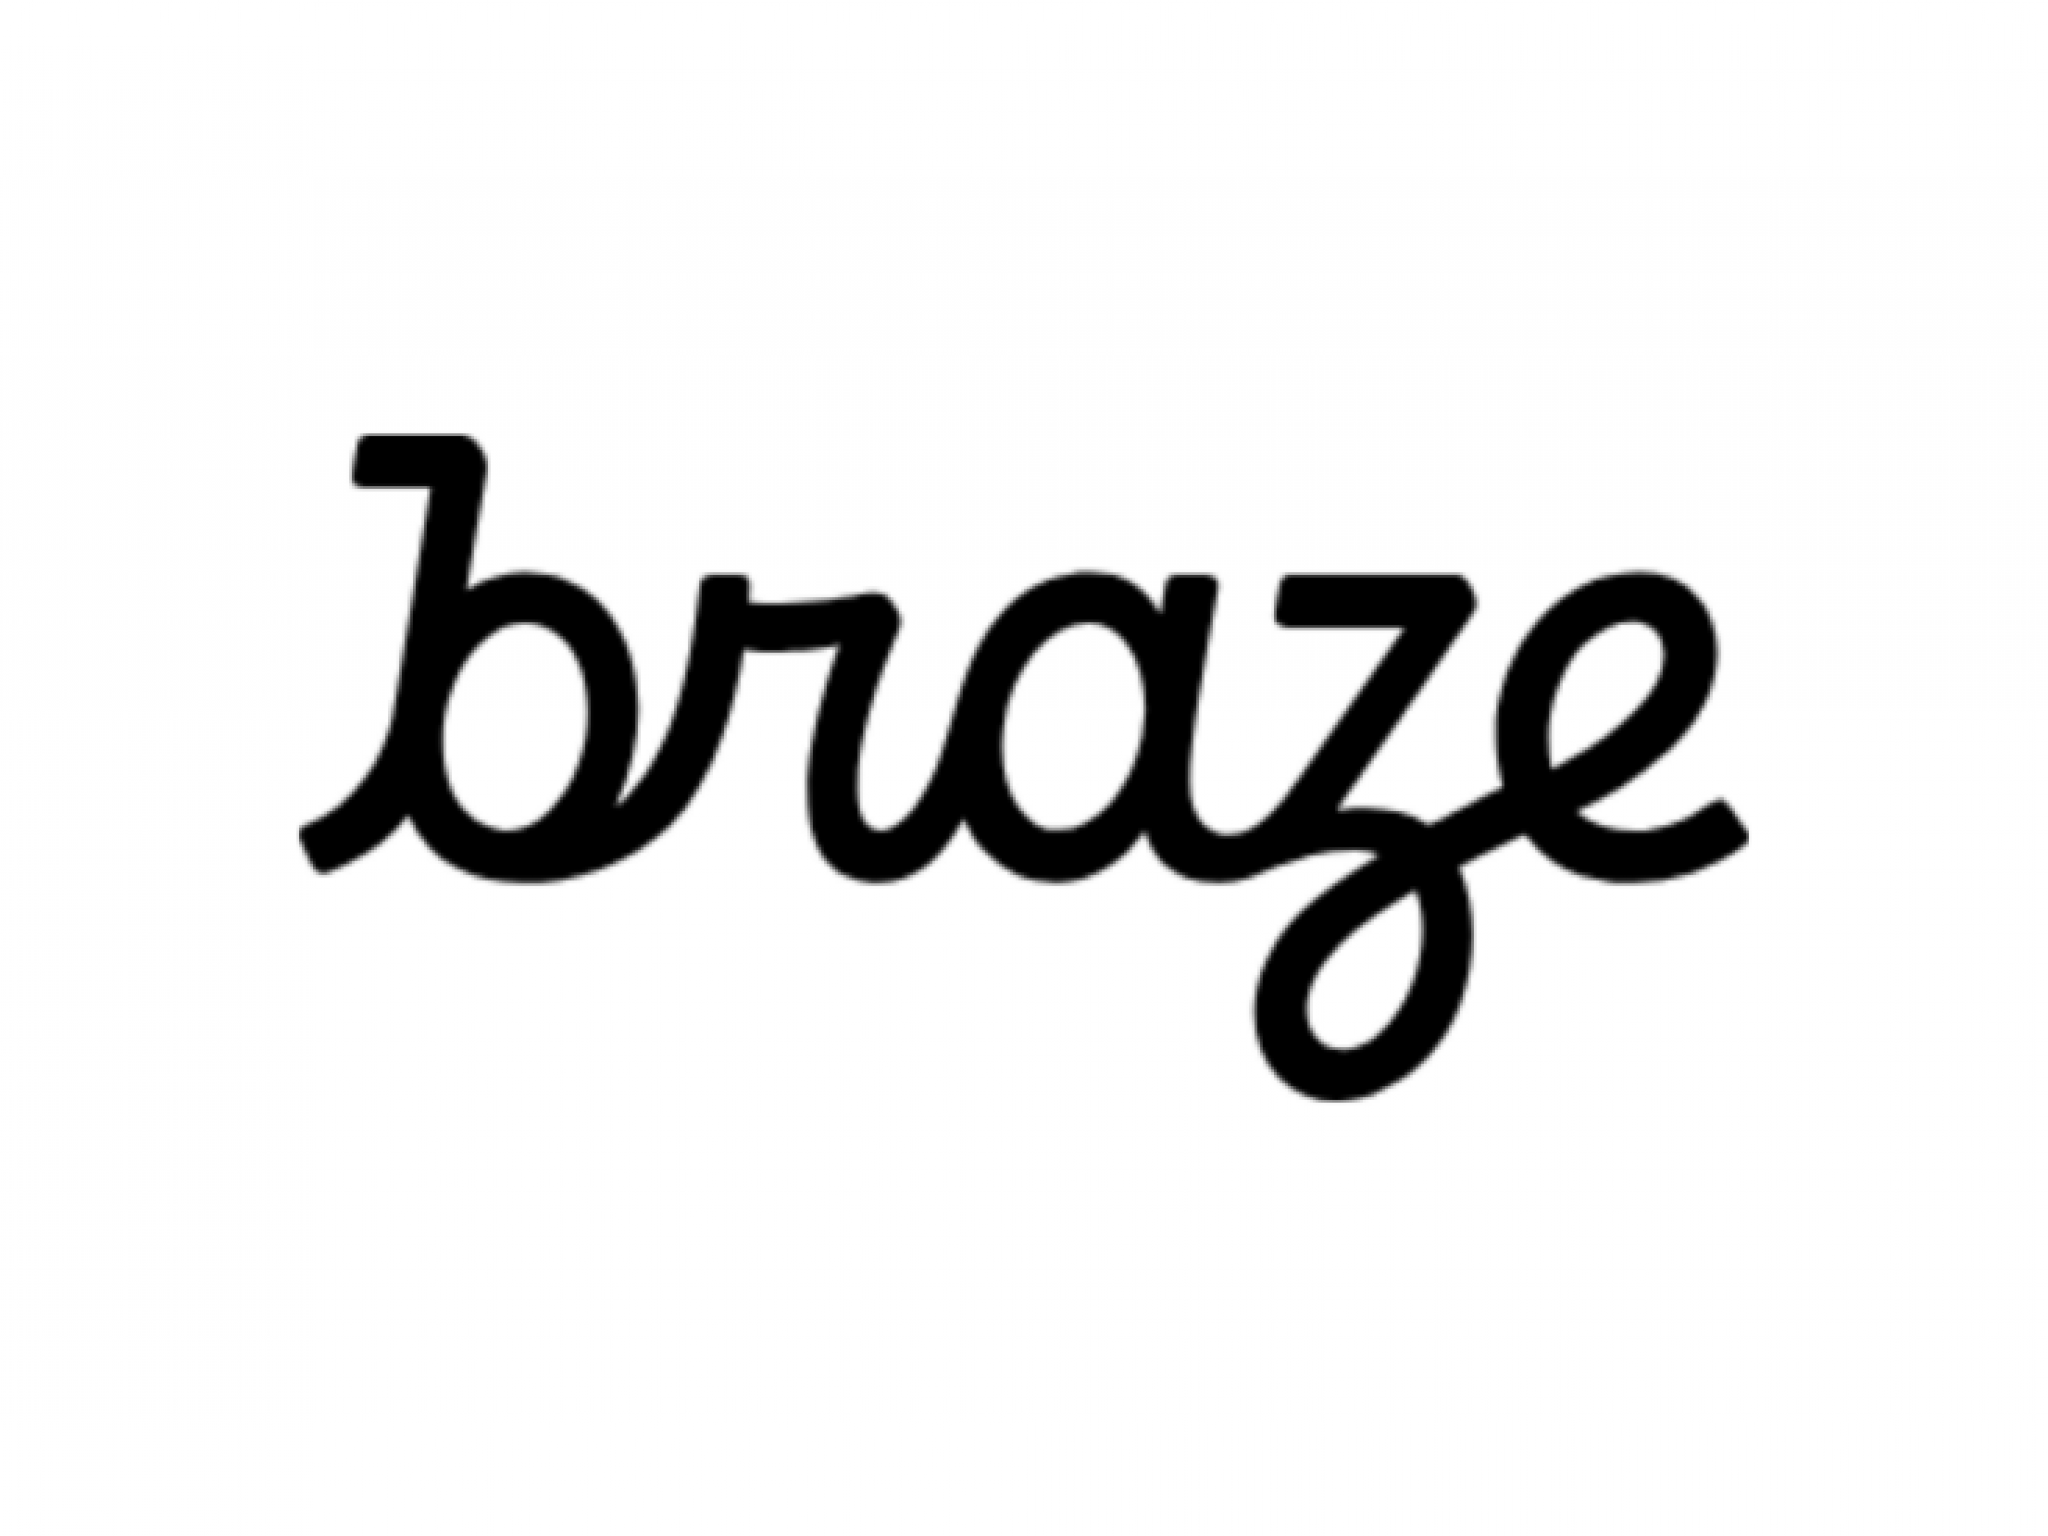  why-cloud-based-software-company-braze-shares-are-diving-today 